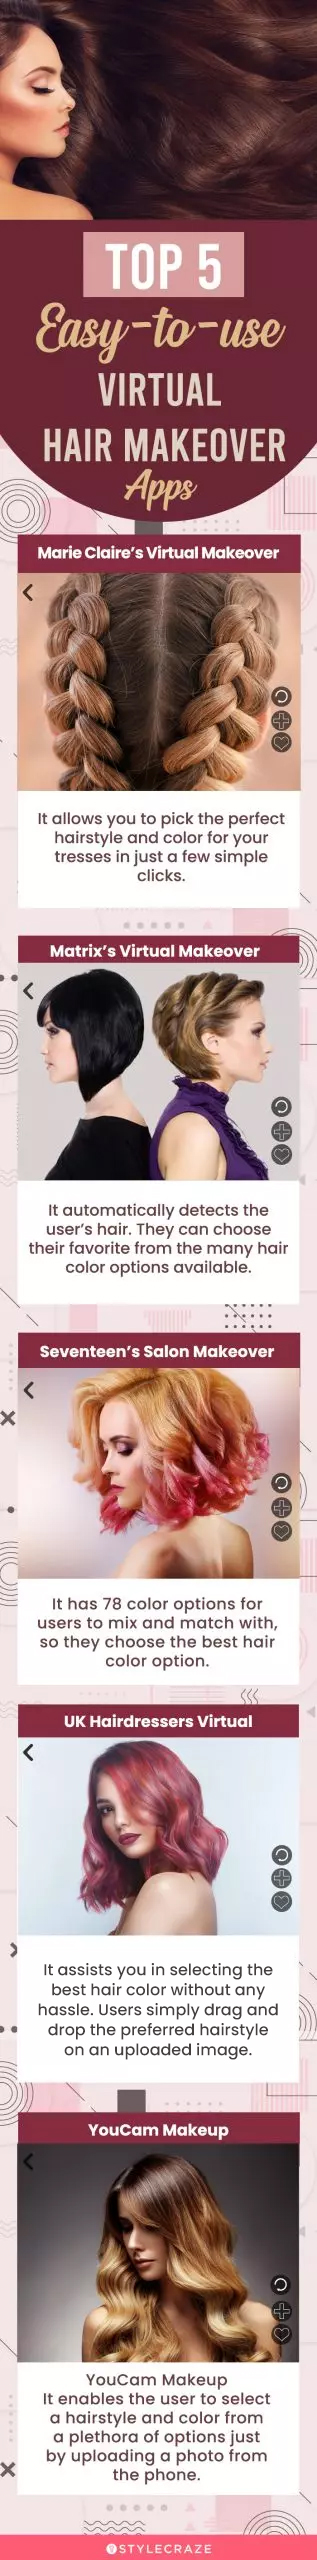 The best iPad apps for hairstyling - appPicker